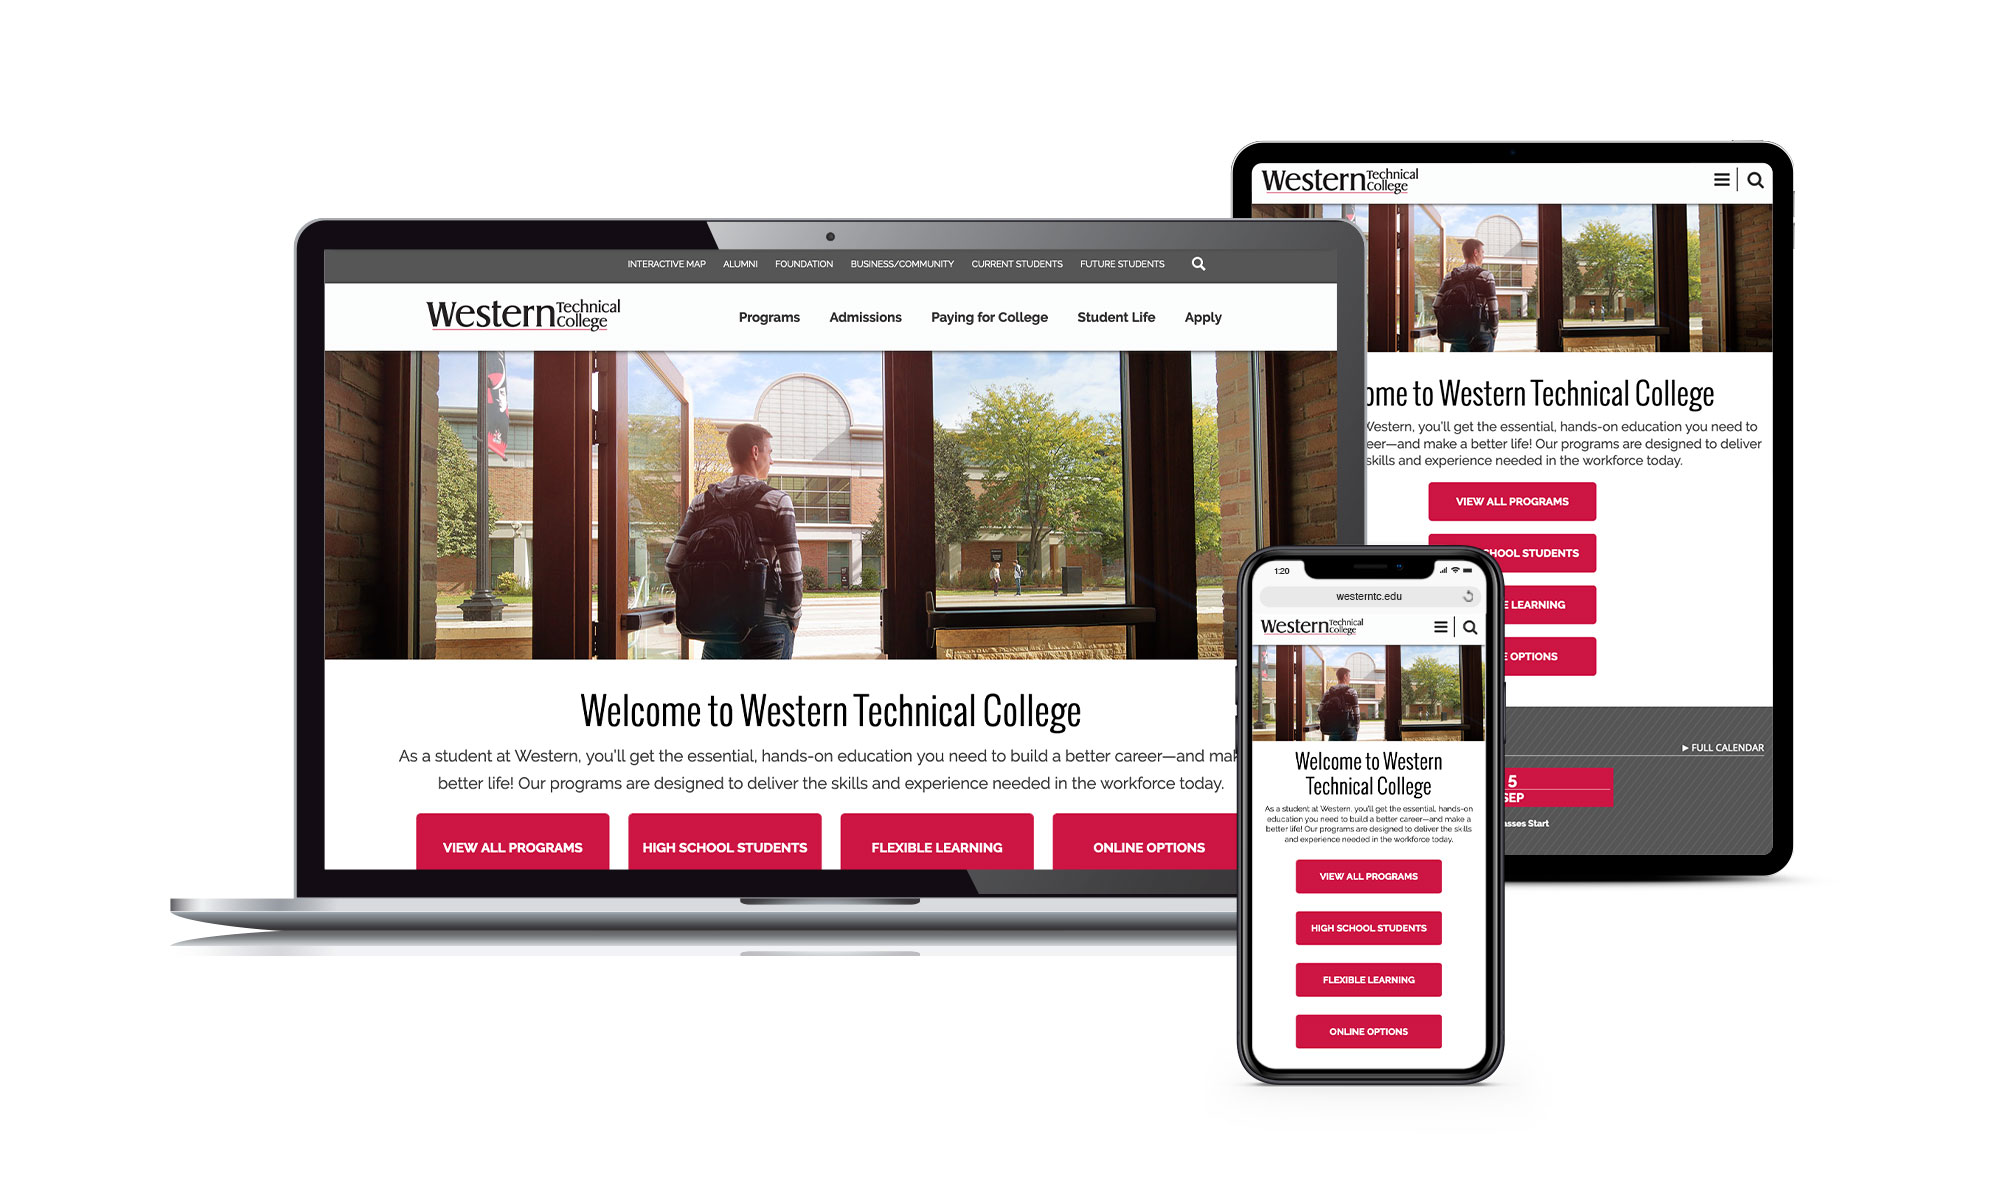 Western Technical College website home screen displayed on laptop, tablet and phone screens